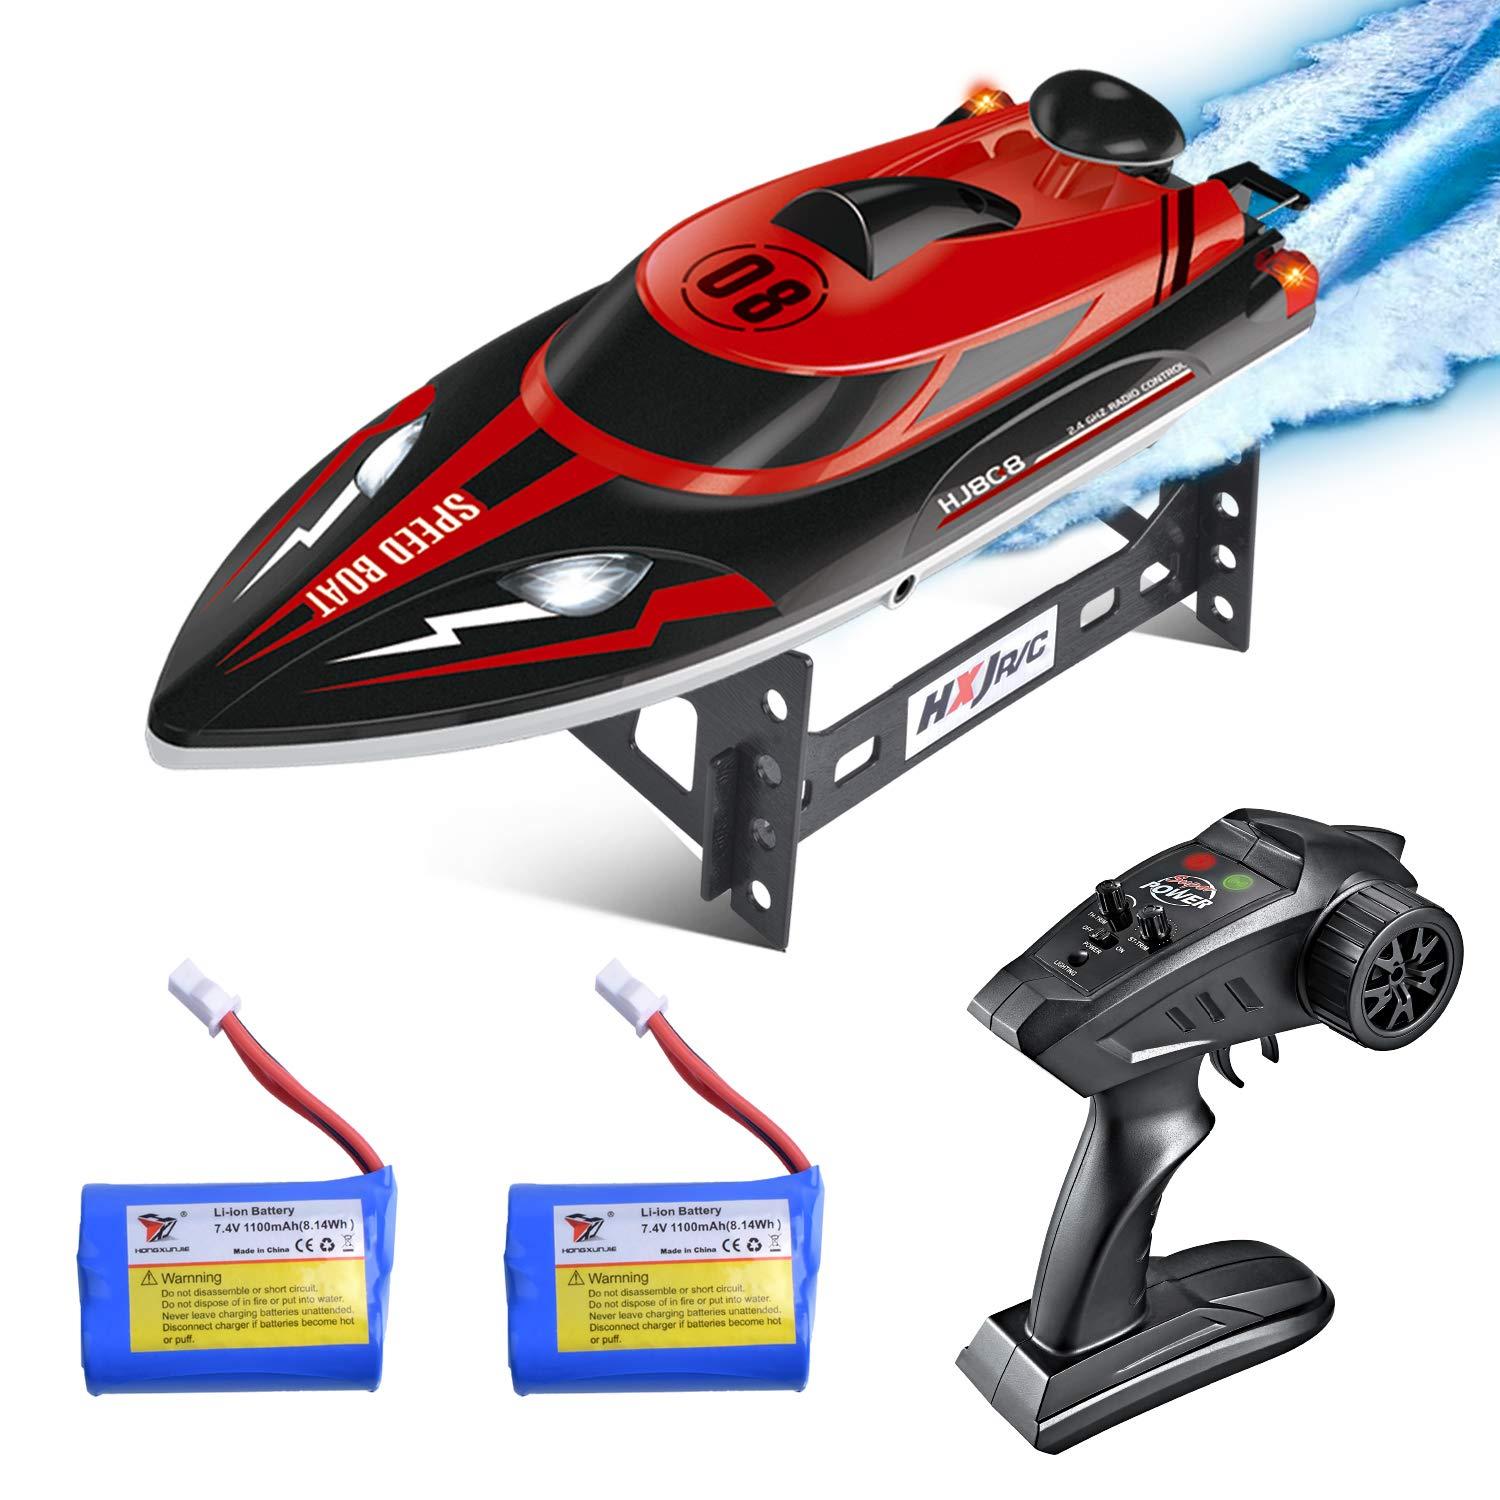 Shockwave Remote Control Boat: Maintaining Your Shockwave RC Boat: Tips for Longevity and Optimal Performance